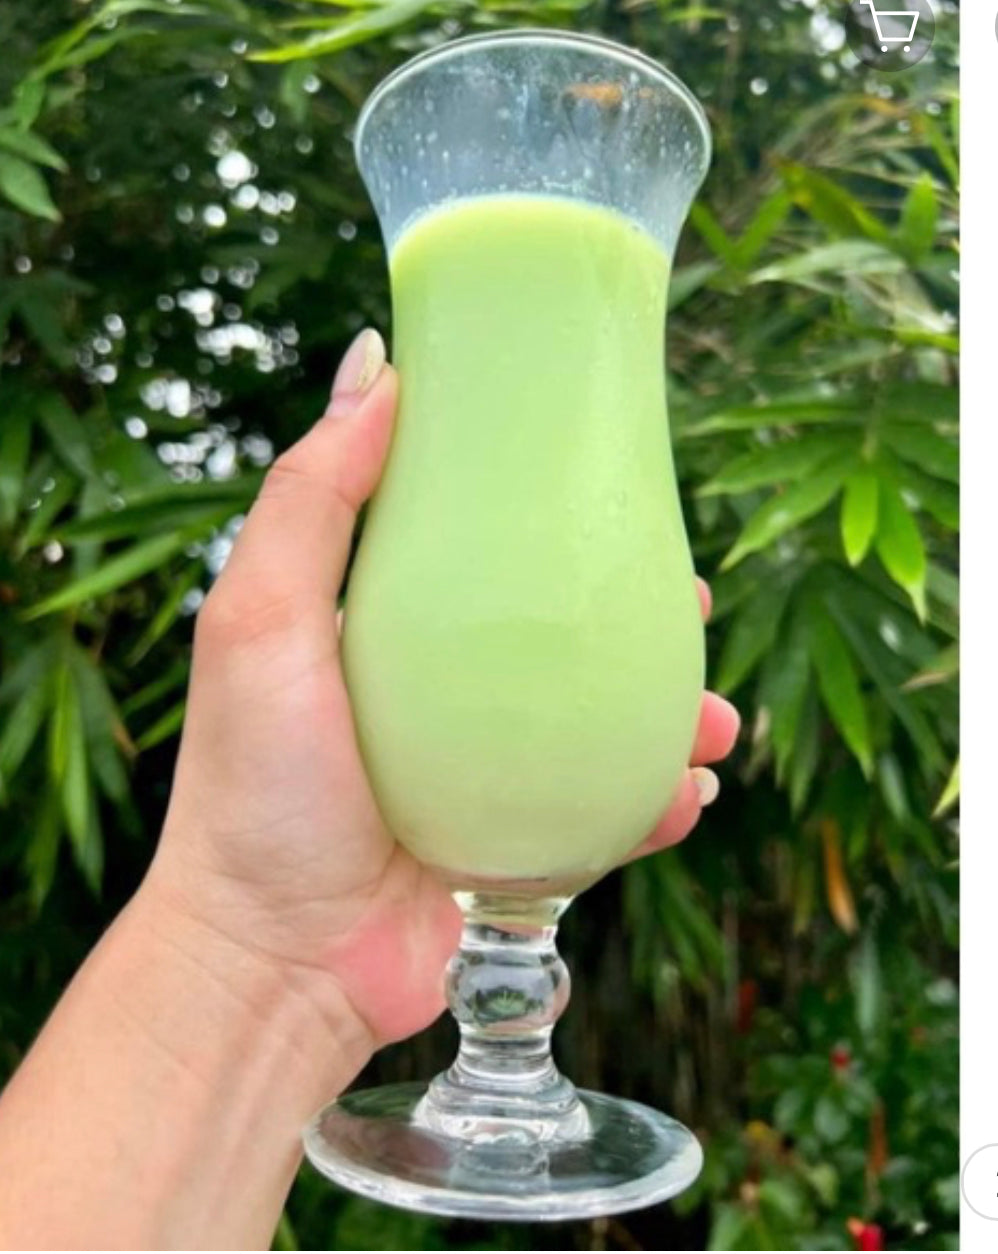 Freshies Avocado Milk with Gluta and Collagen